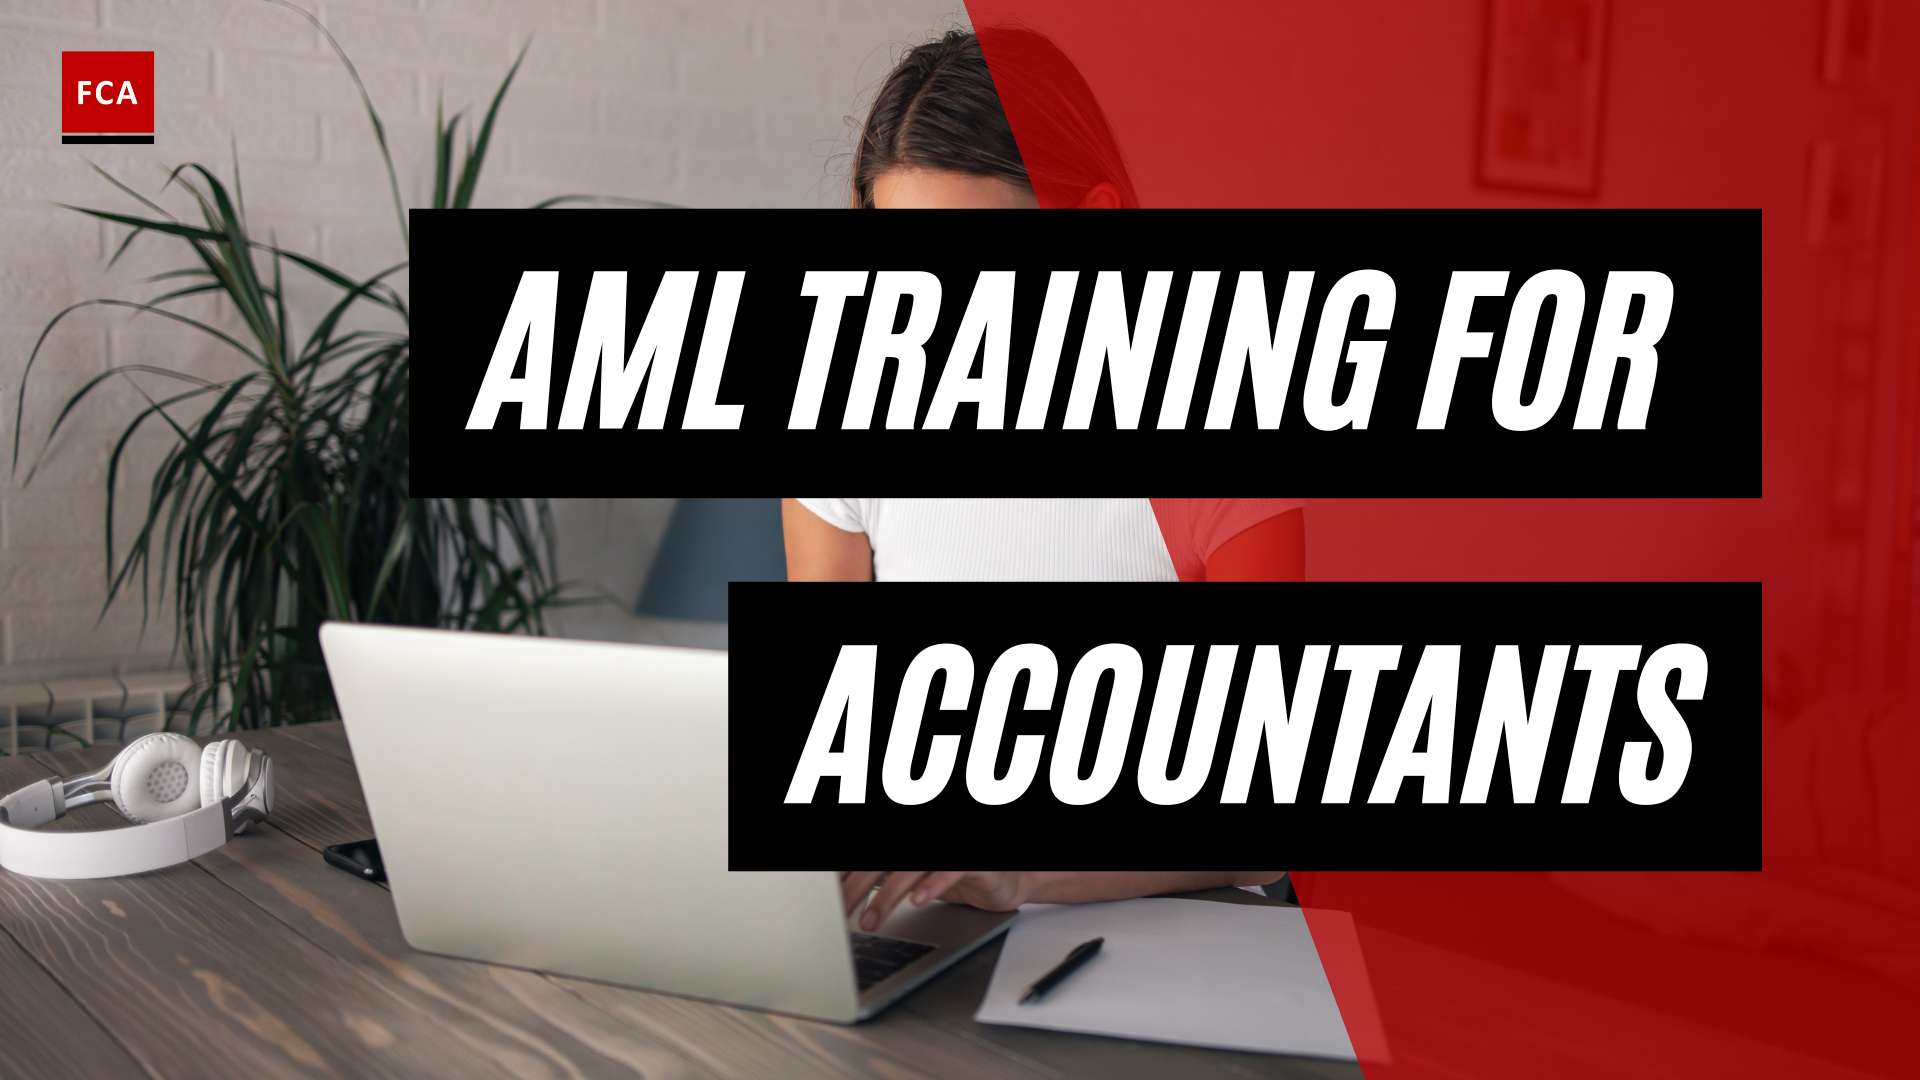 Leveling Up: Aml Training For Accountants To Combat Financial Crime